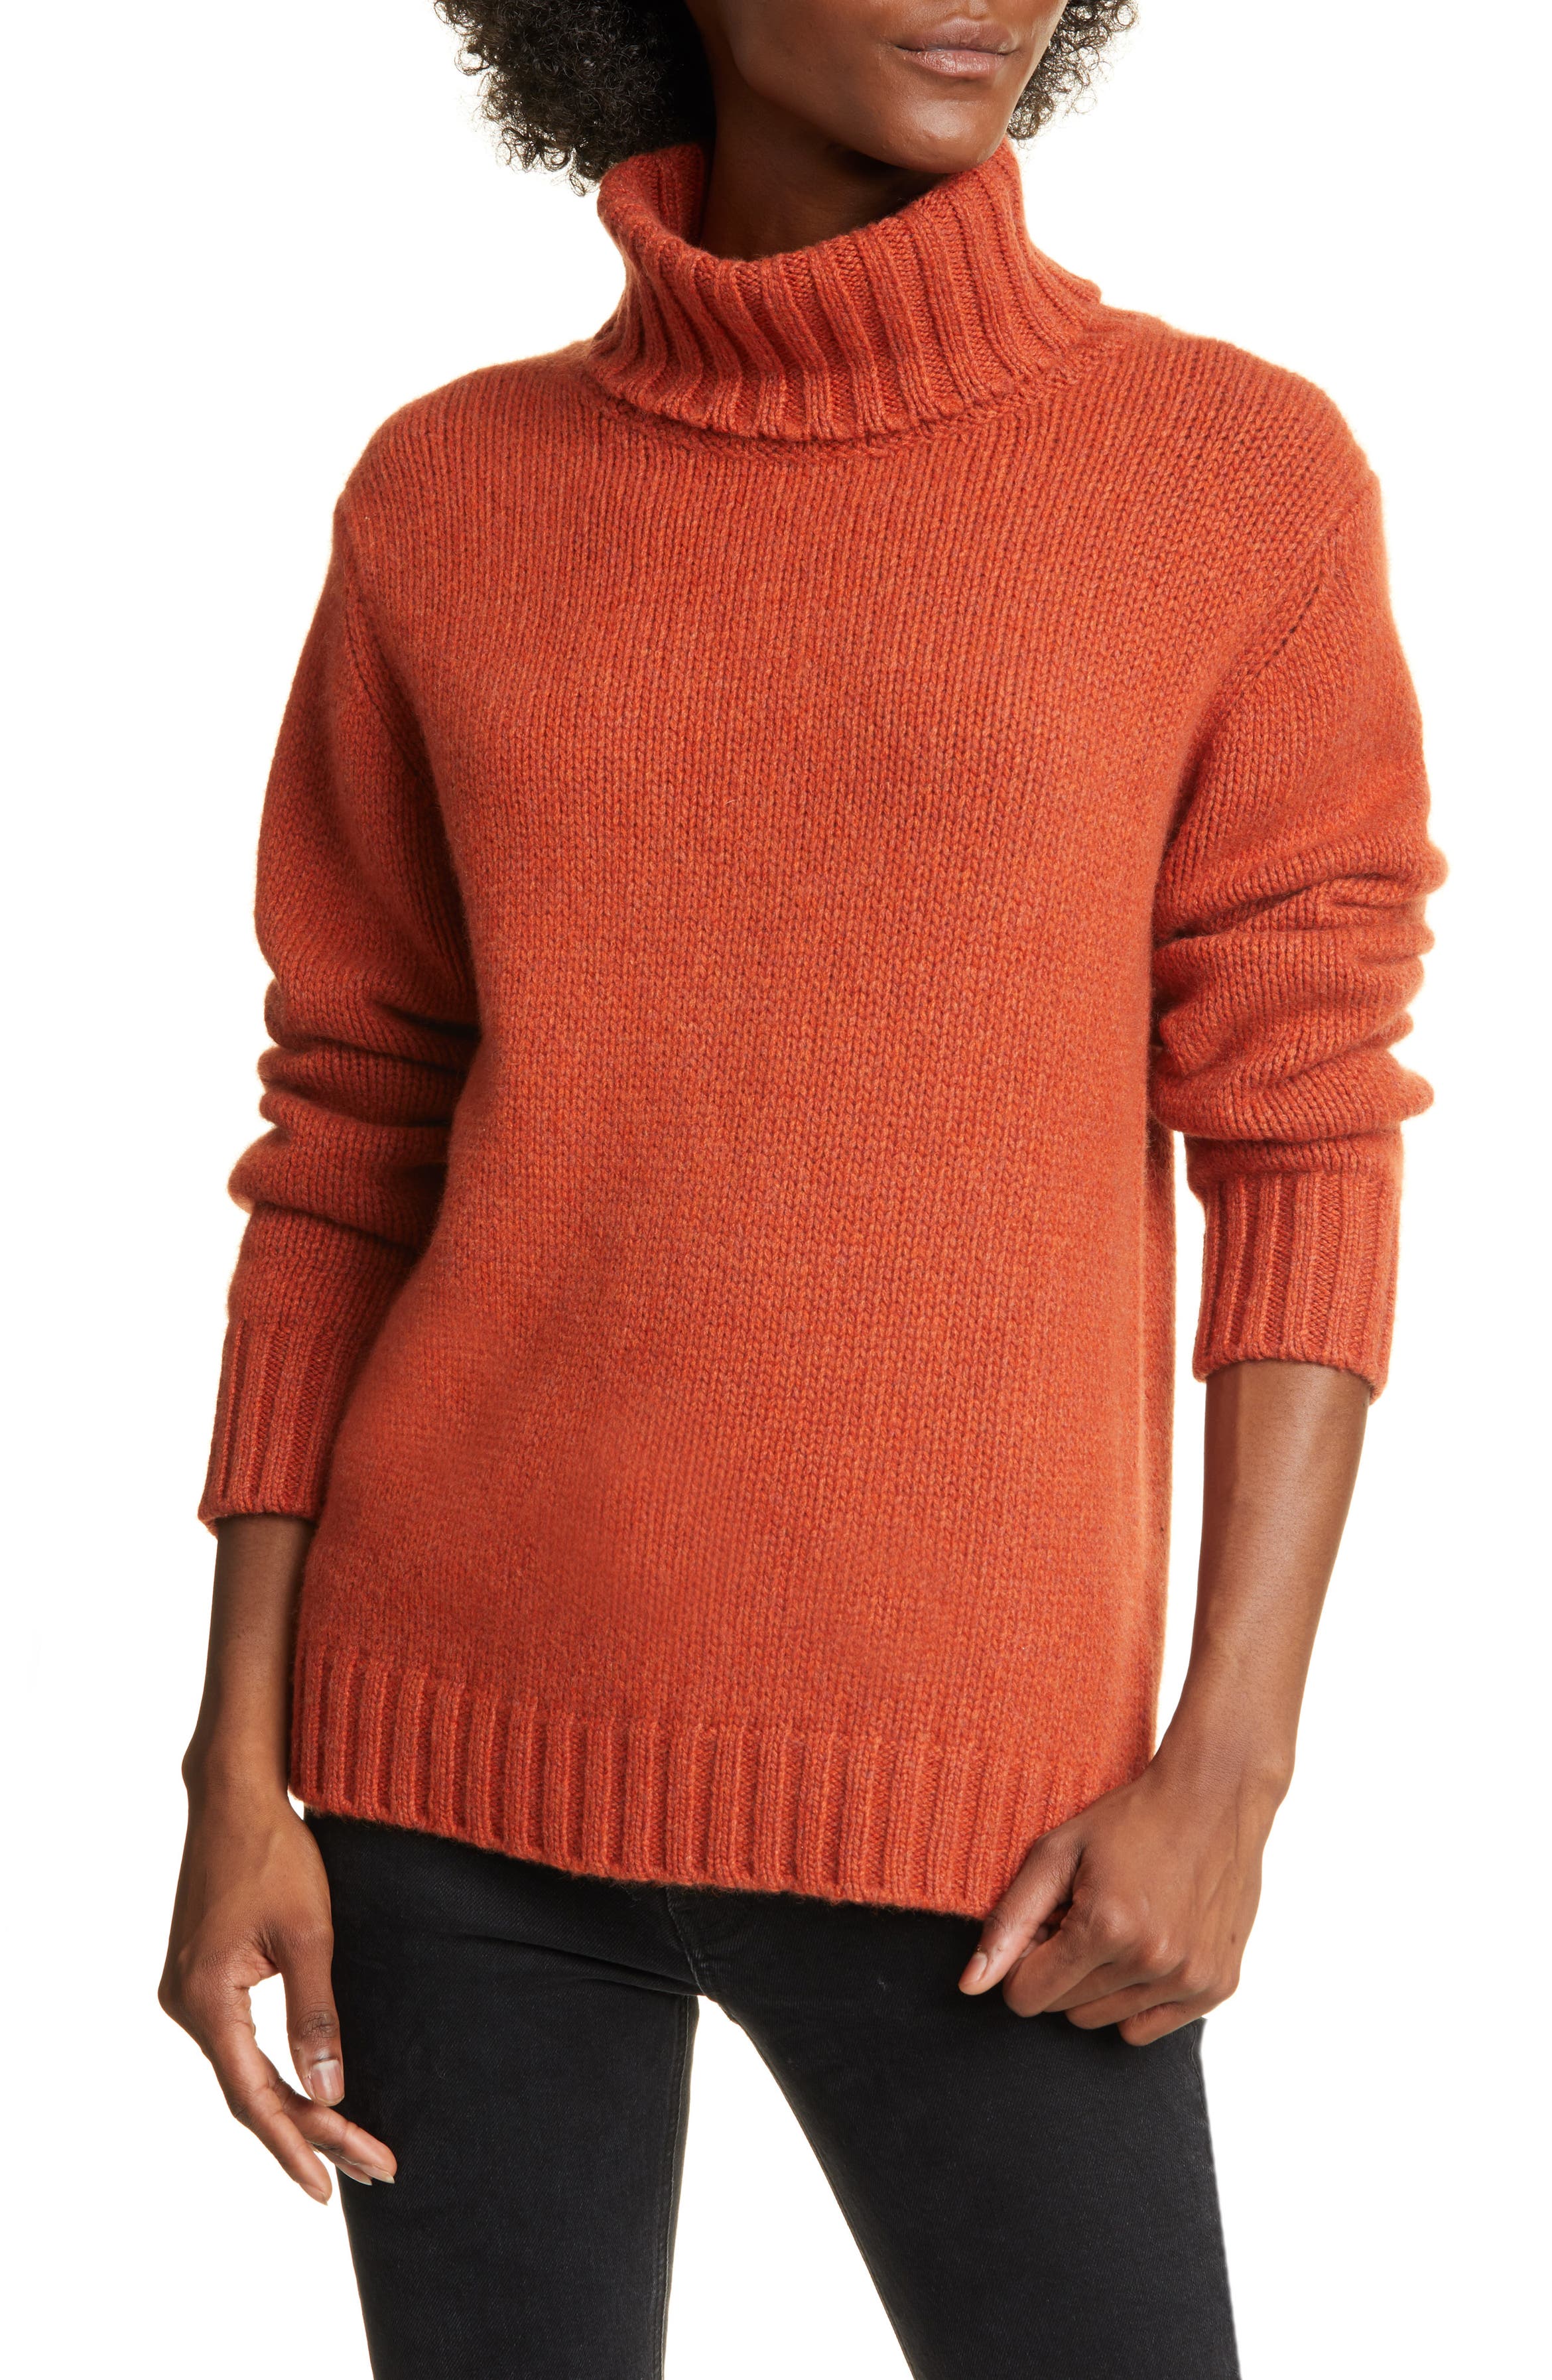 Allude Cashmere Turtleneck Sweater | Nordstrom